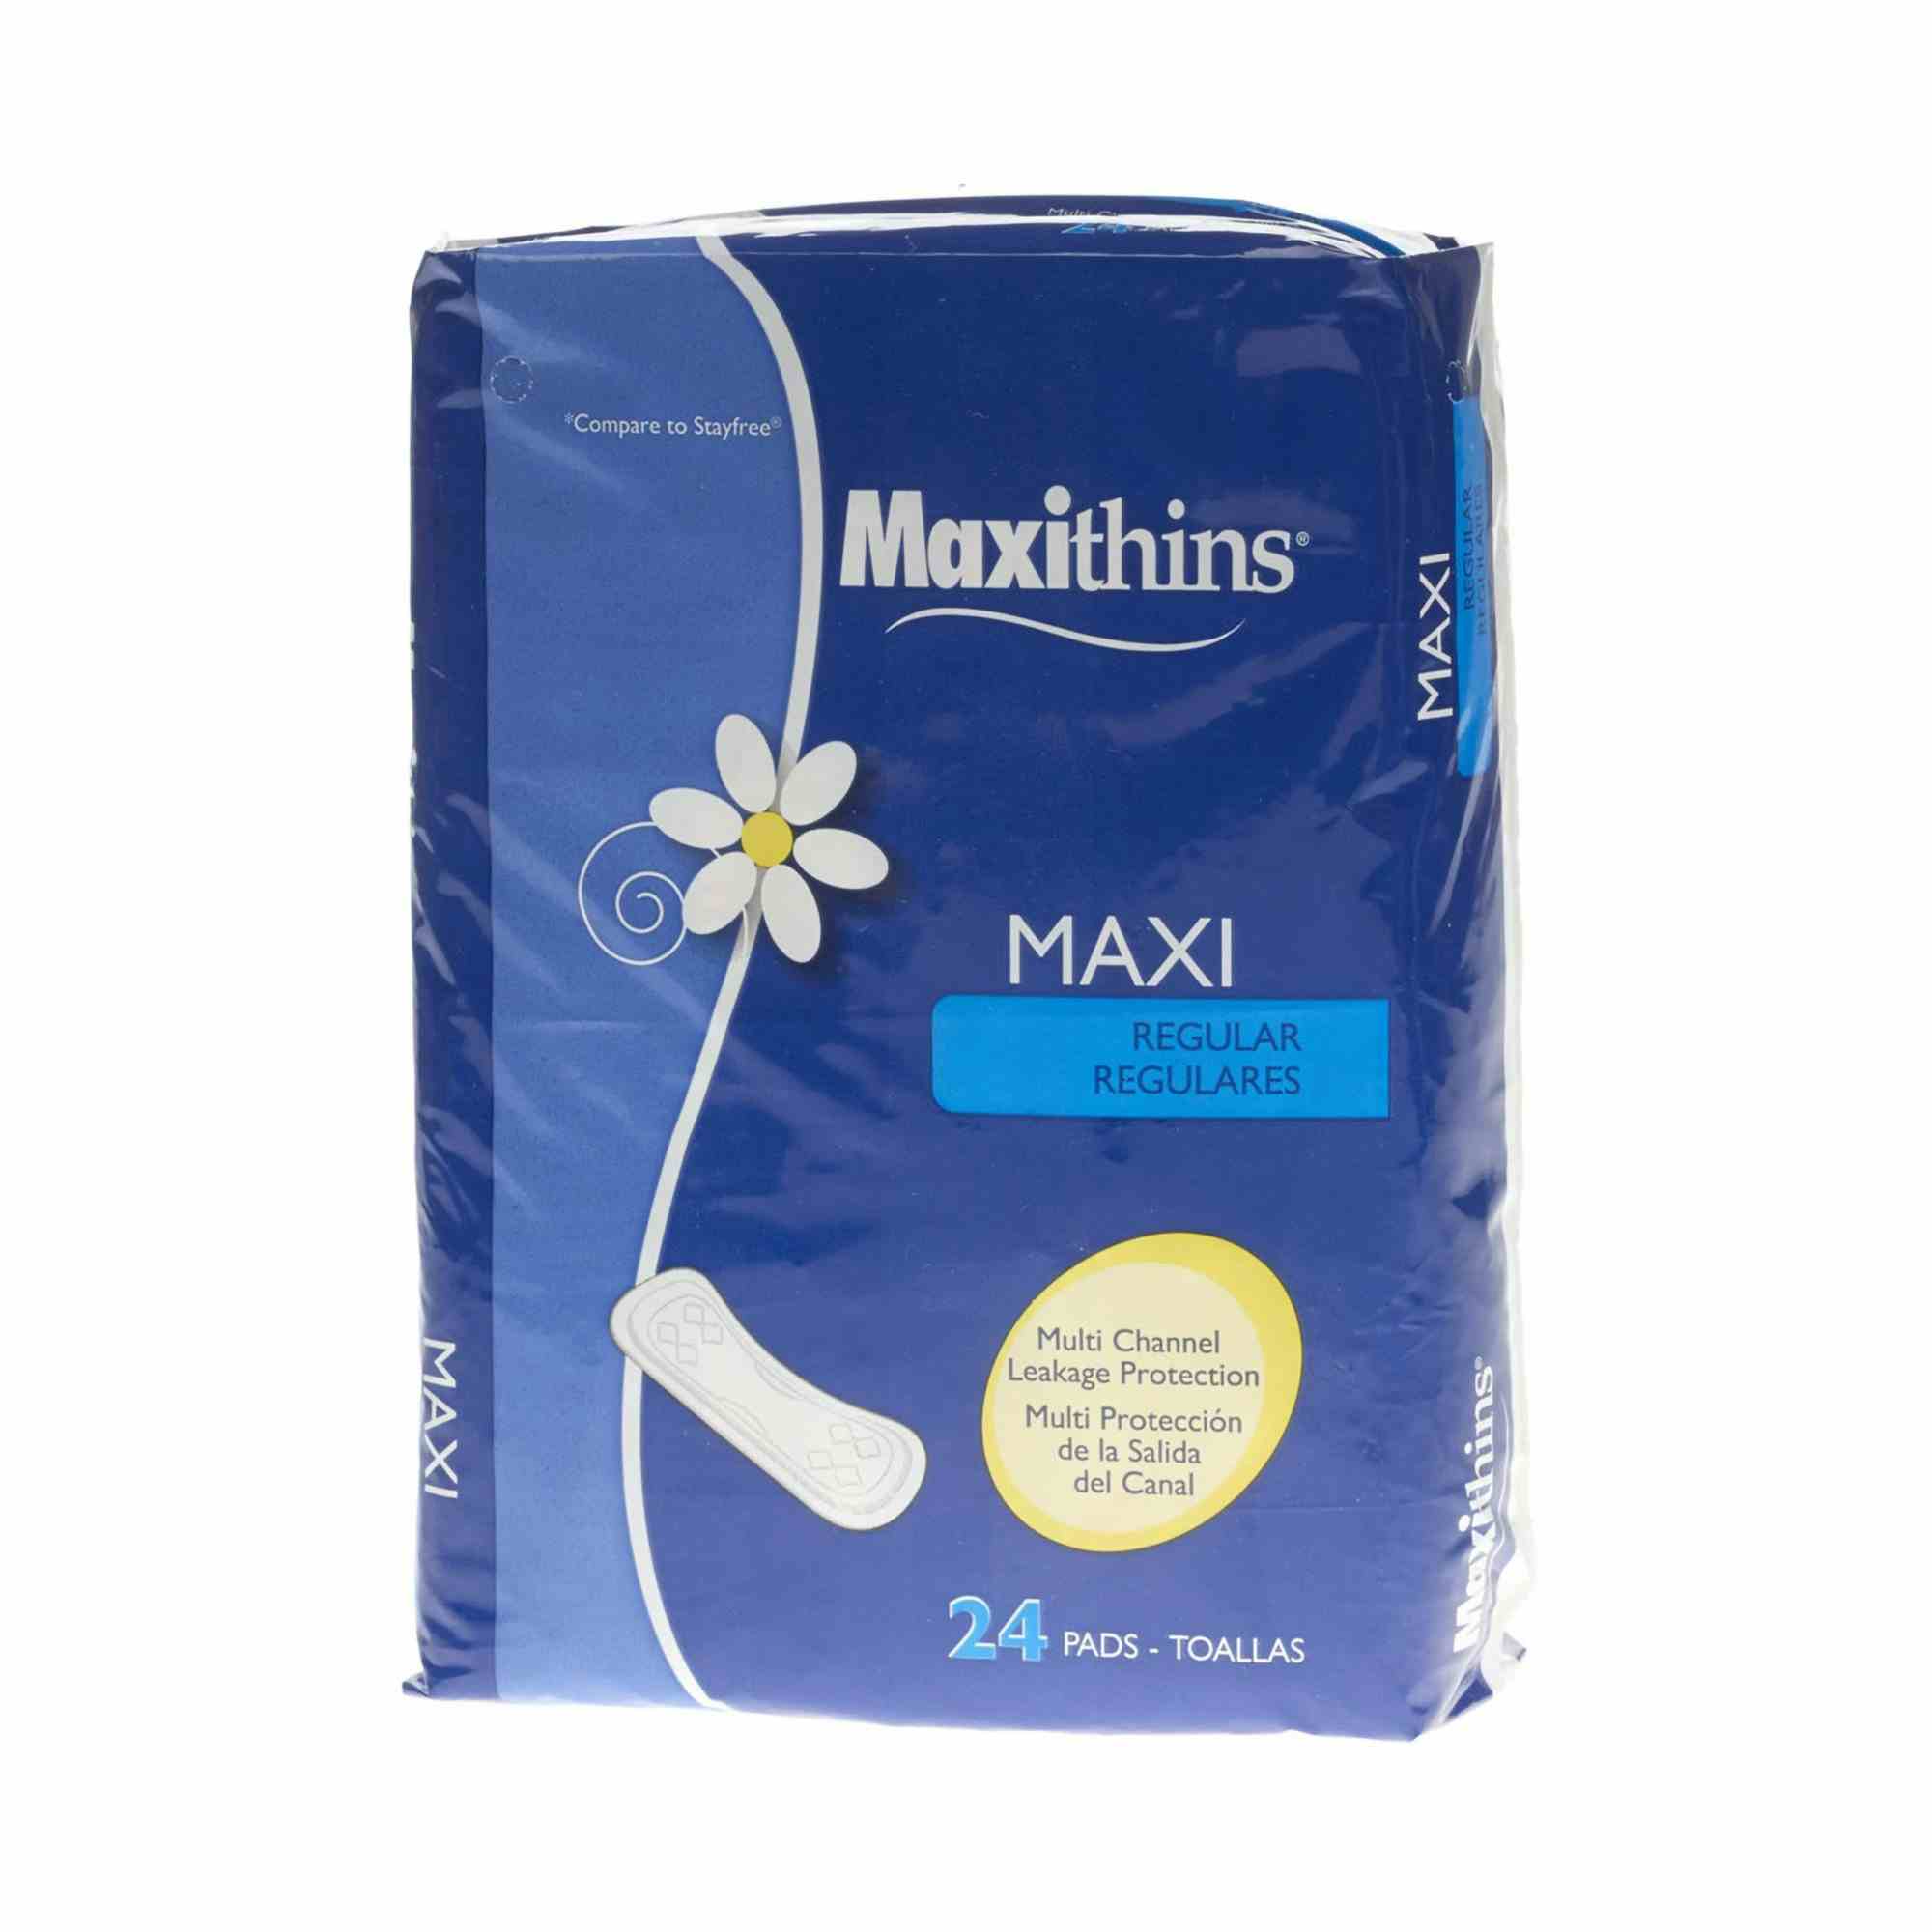 Maxithins Maxi Pads, Regular Absorbency, MT48044, Pack of 24